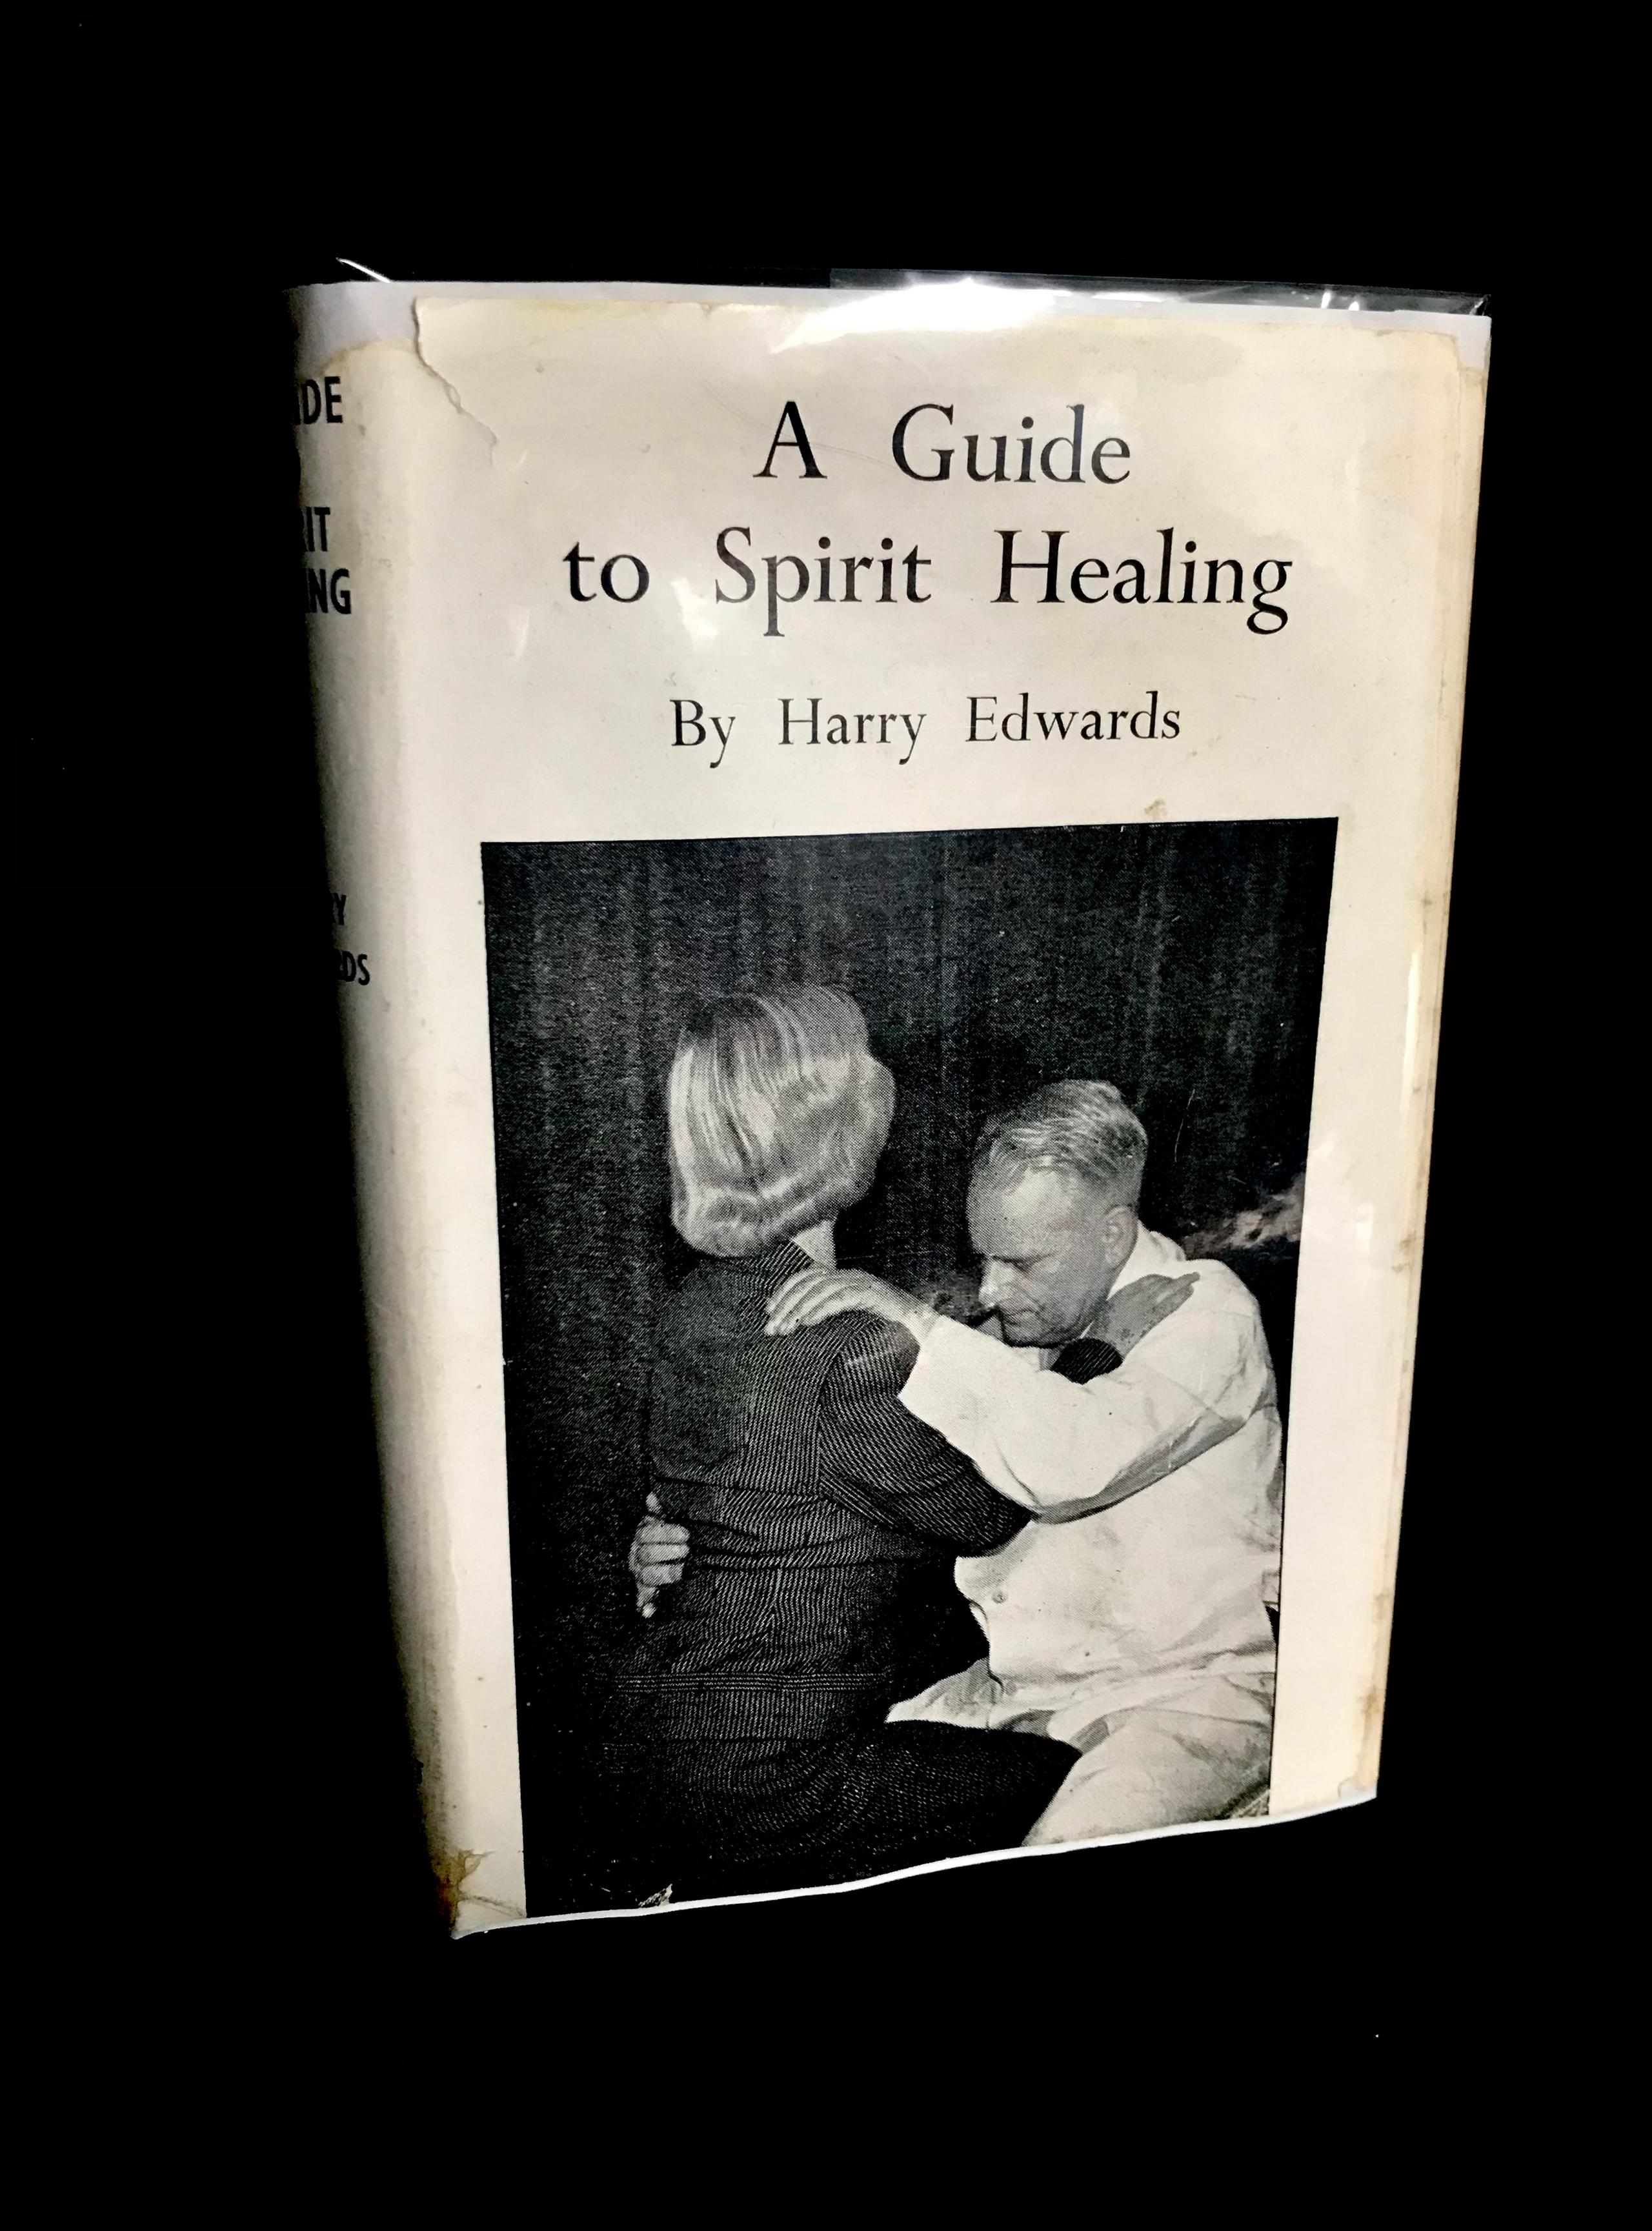 A Guide To Spirit Healing by Harry Edwards